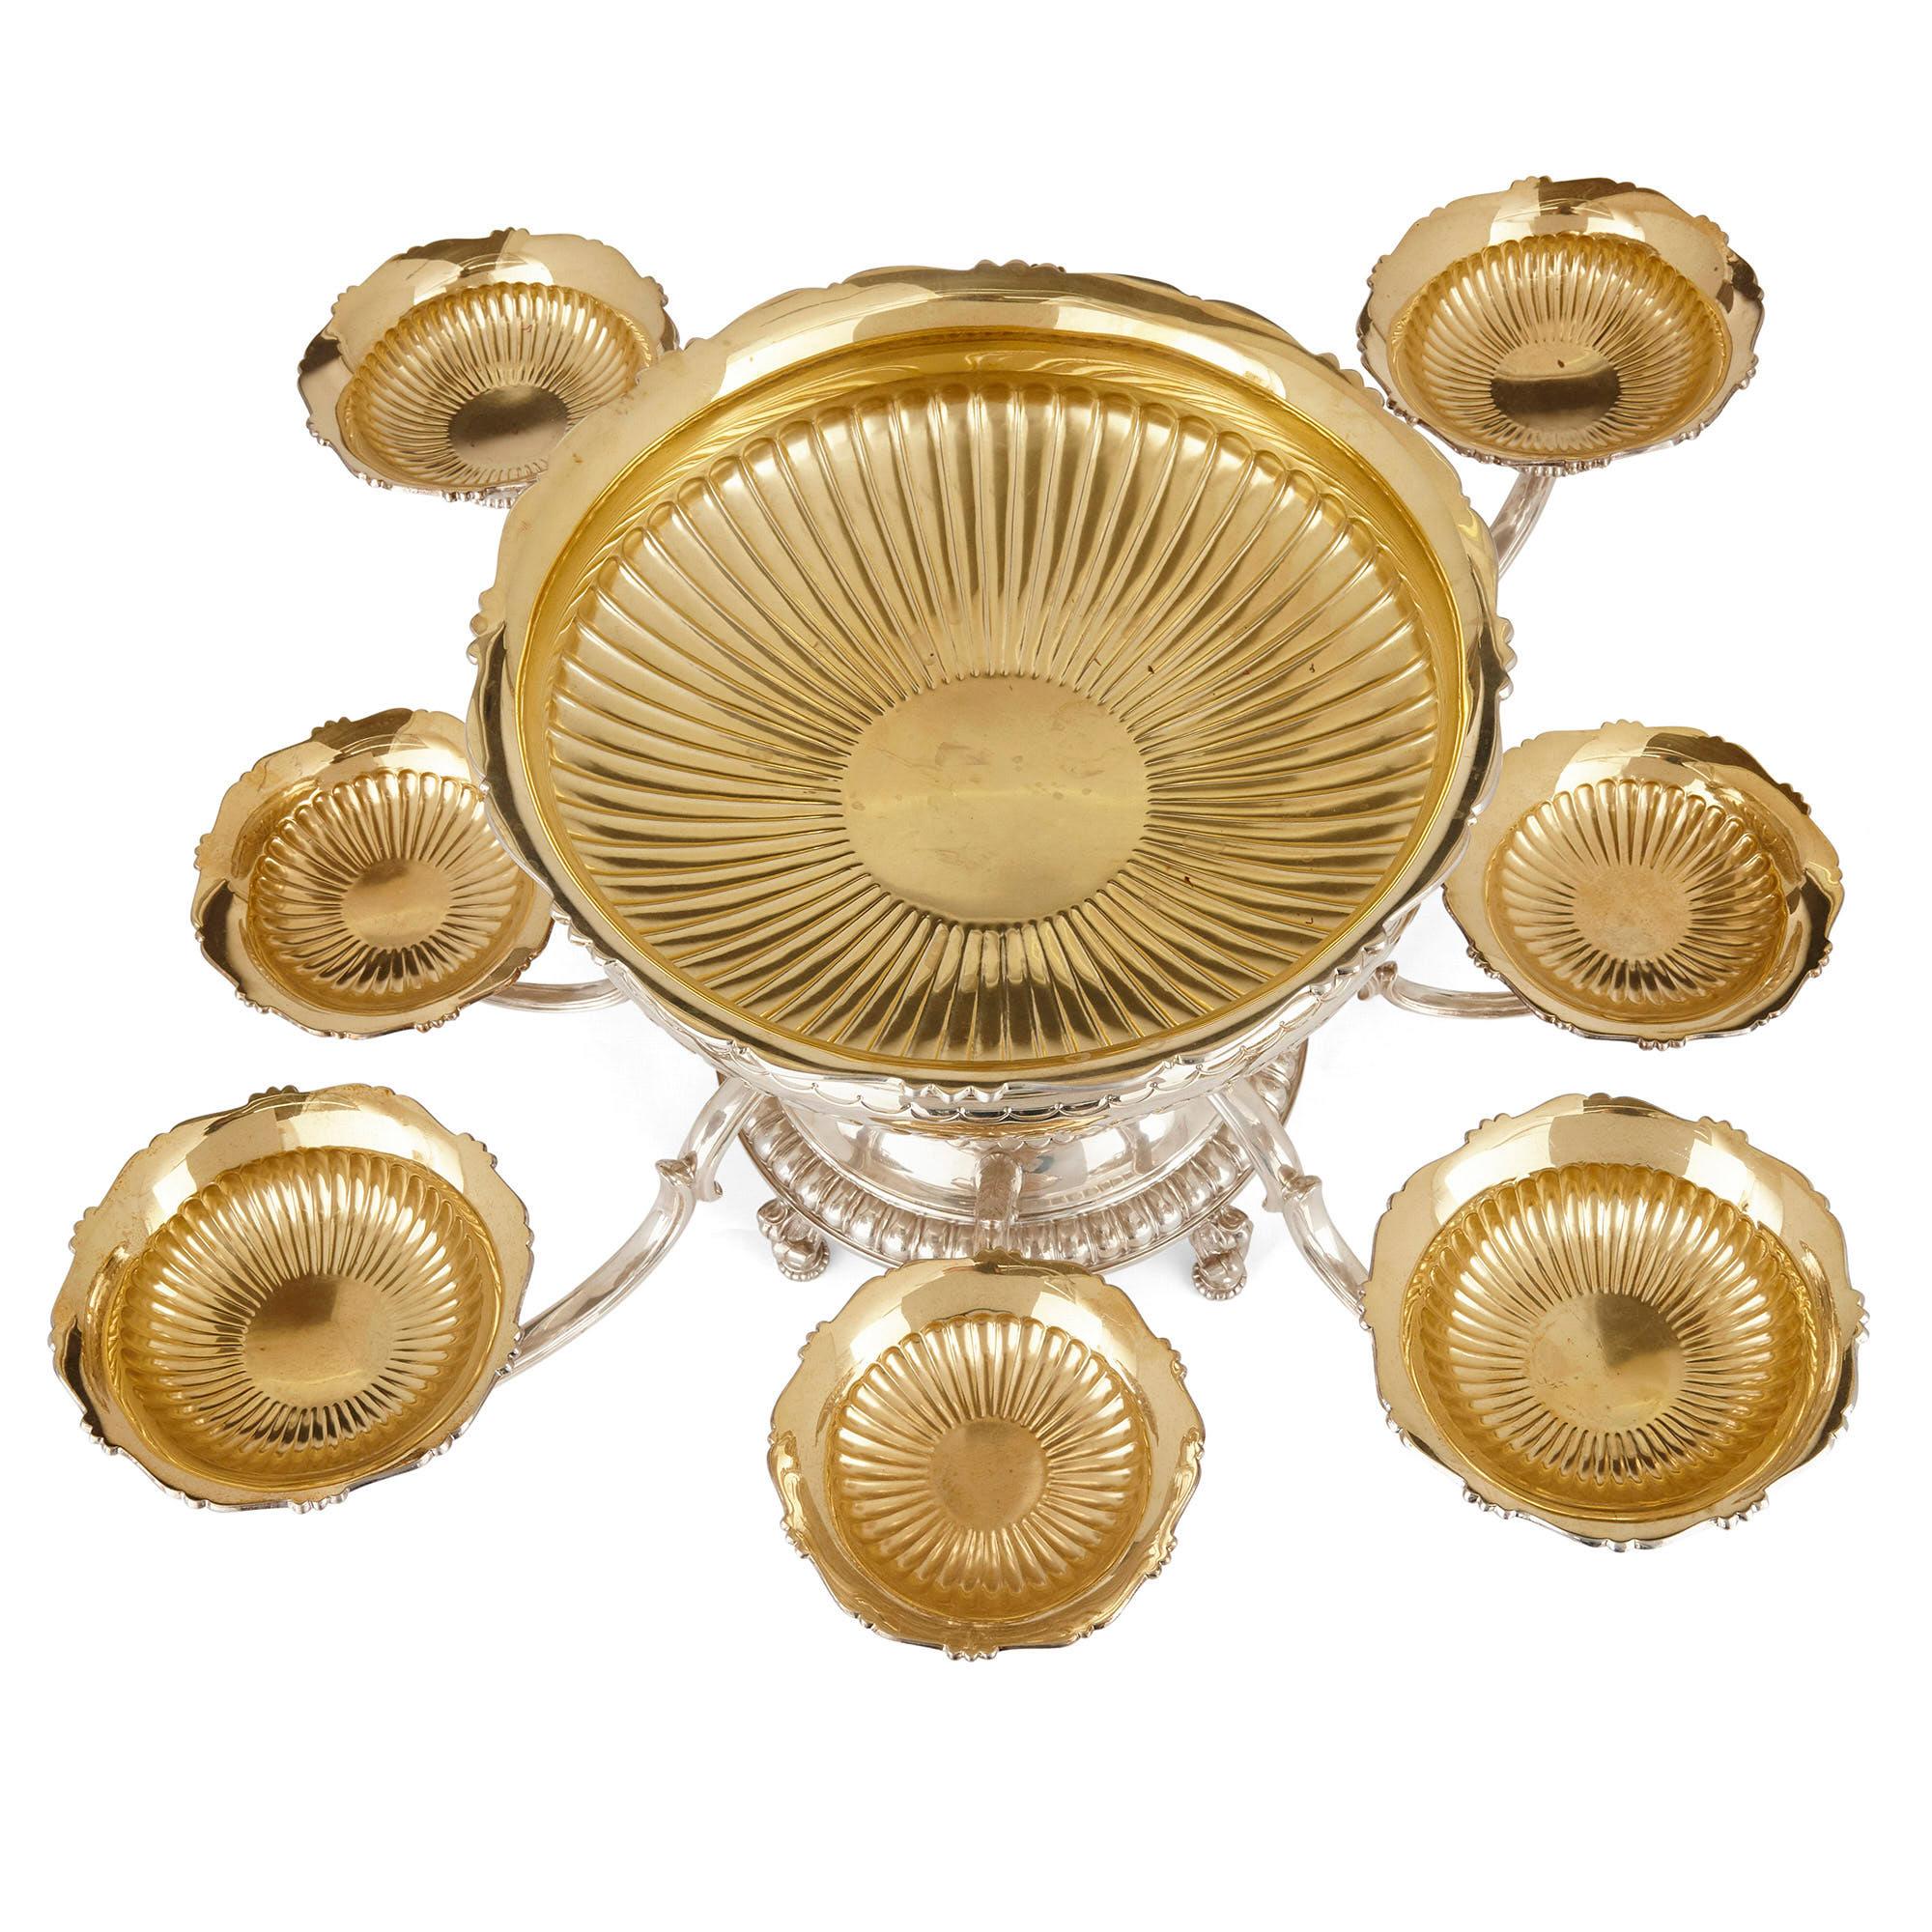 Asprey vermeil and silver table centerpiece
English, late 20th century
Measures: Height 33cm, diameter 80cm

This sterling silver and gilt epergne centerpiece was crafted by luxury makers Asprey, which was founded in late 18th century, London.